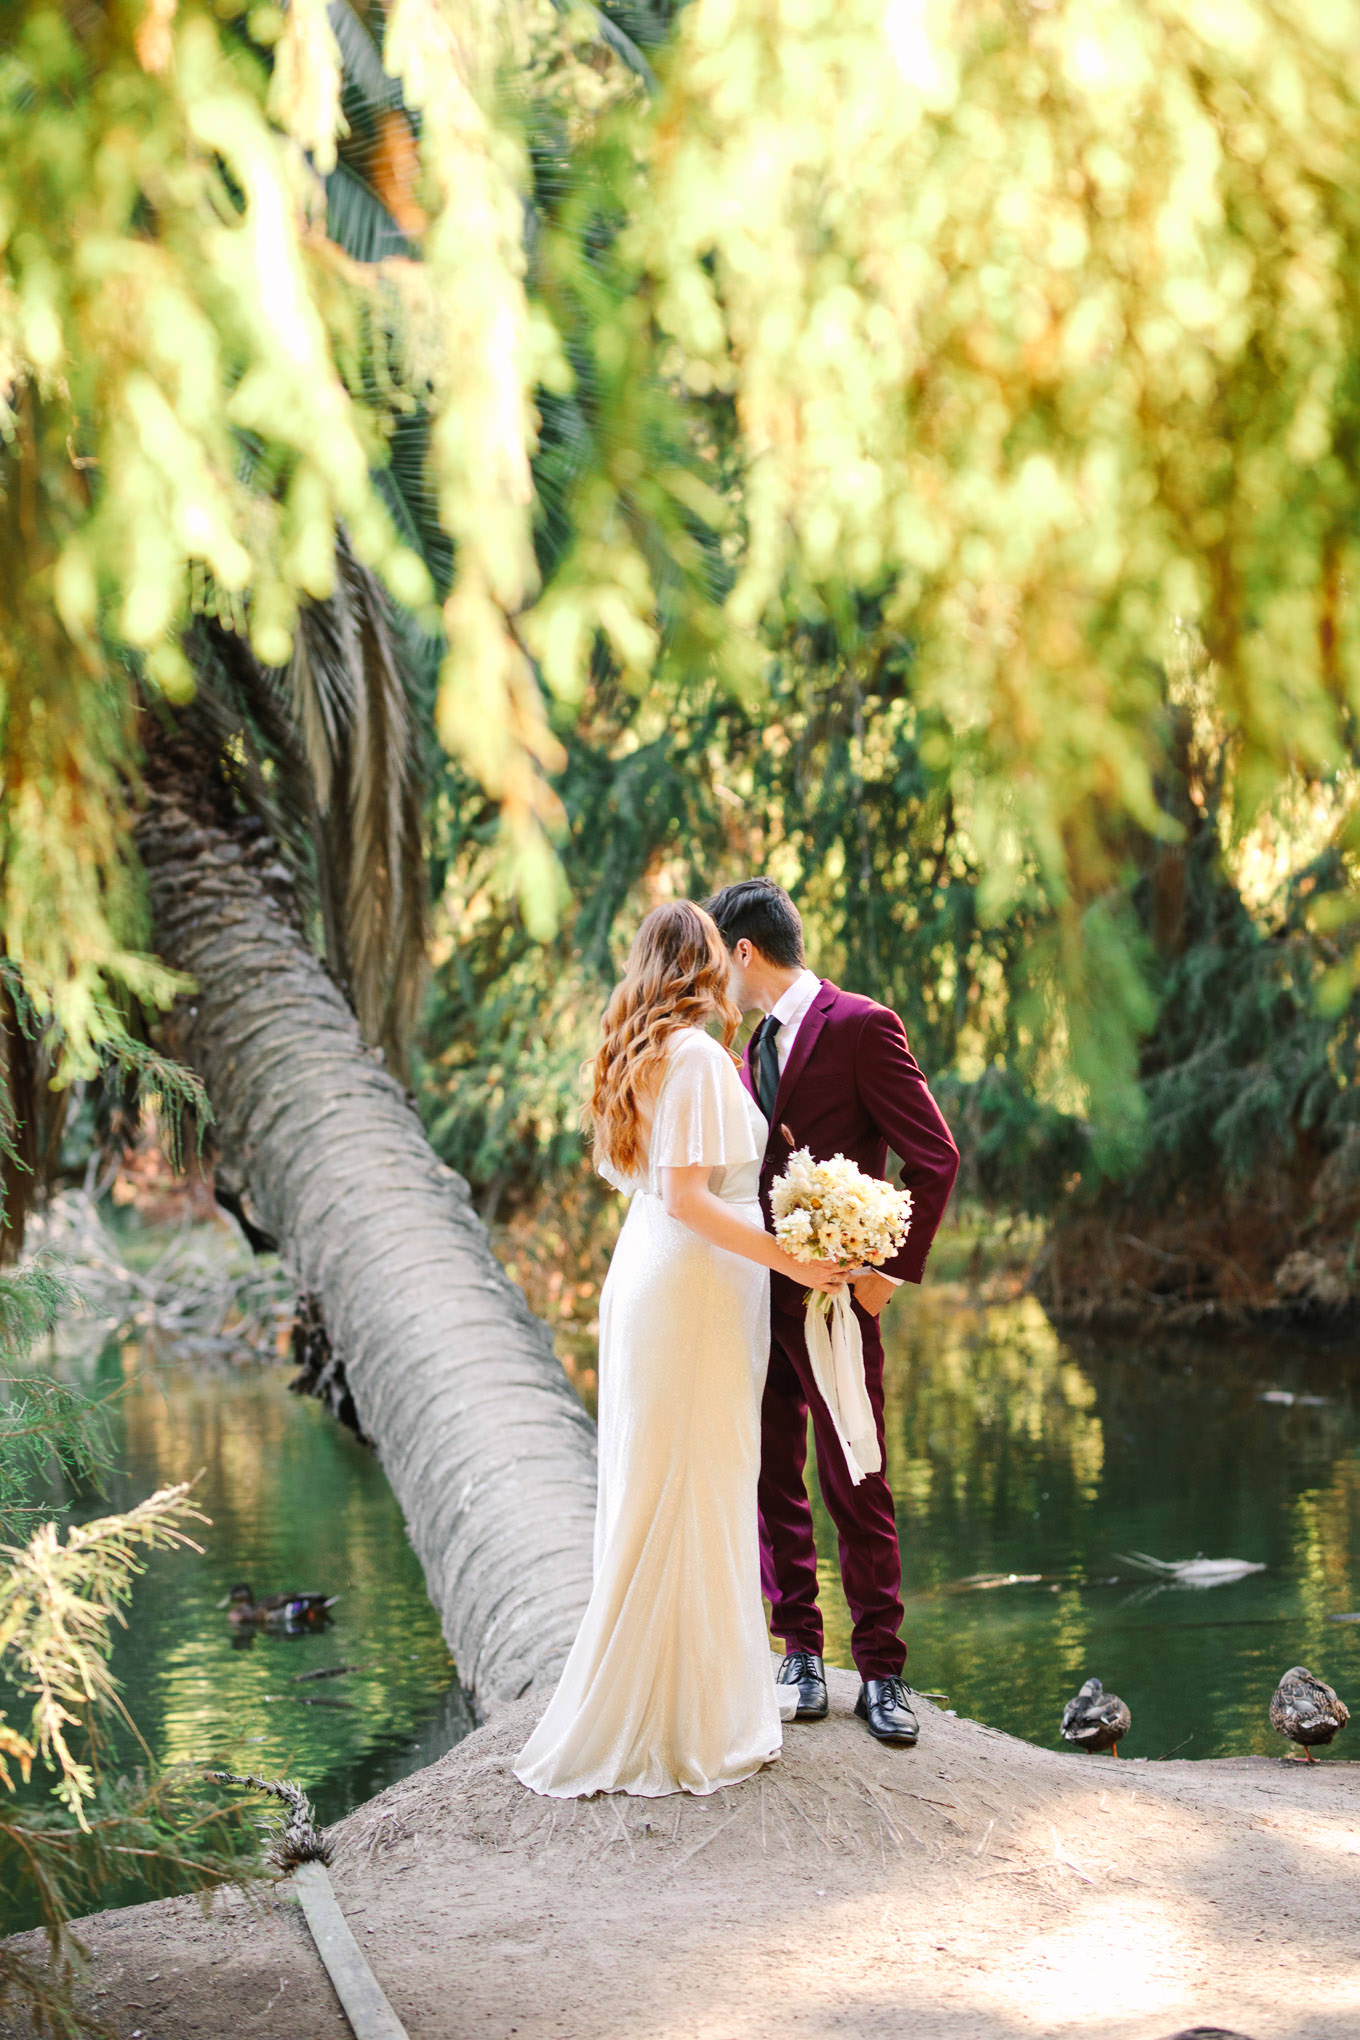 Bride and groom near pond | Los Angeles Arboretum Elopement | Colorful and elevated wedding photography for fun-loving couples in Southern California | #LosAngelesElopement #elopement #LAarboretum #LAskyline #elopementphotos   Source: Mary Costa Photography | Los Angeles